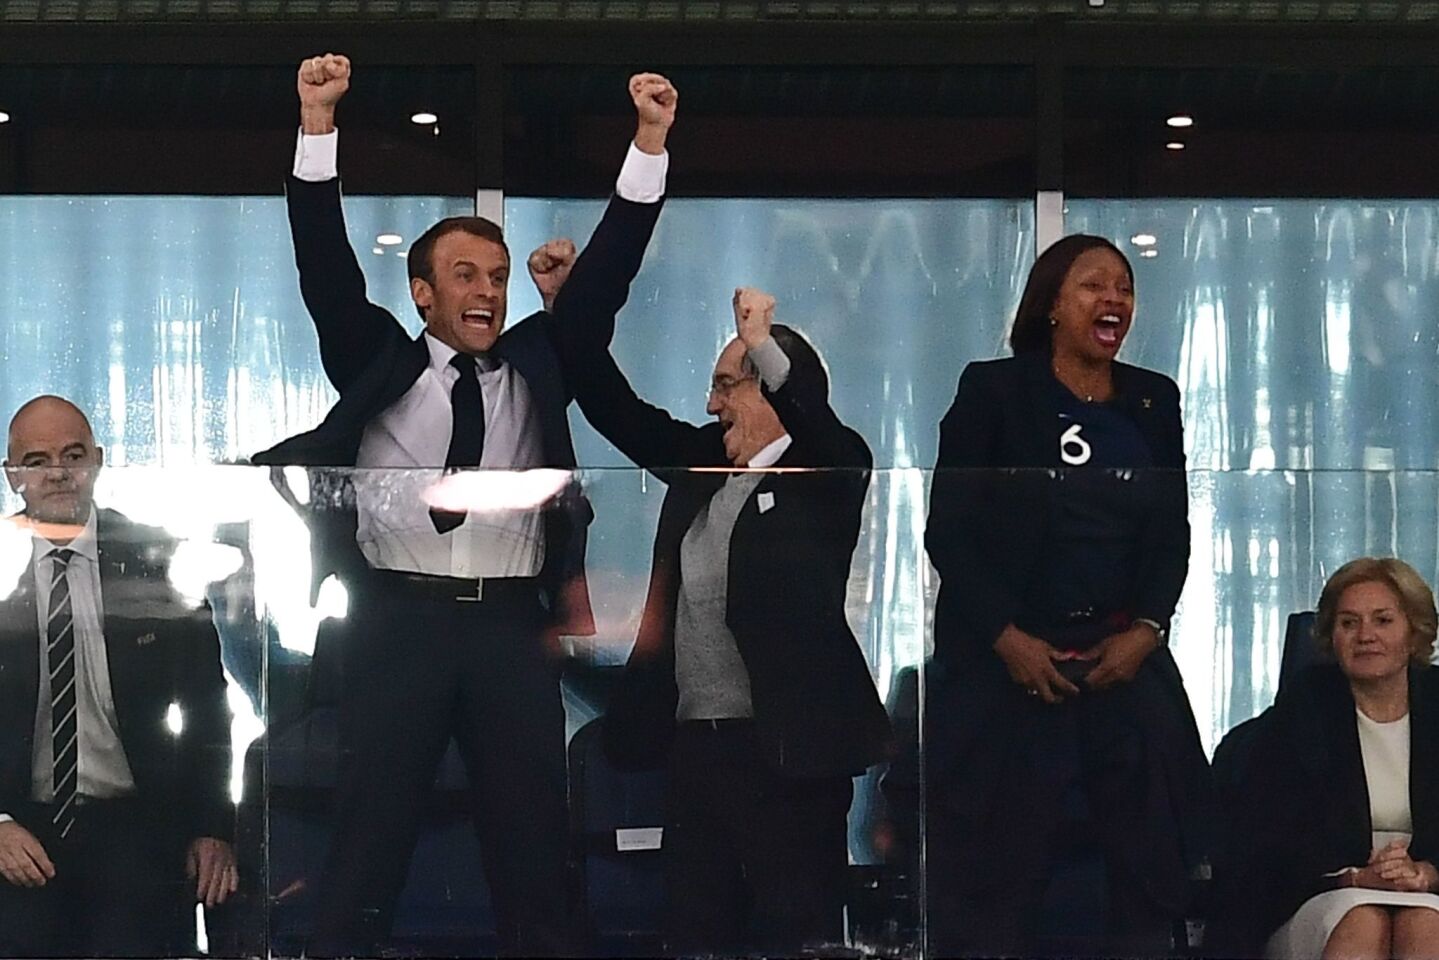 French President Emmanuel Macron, left, celebrates alongside French Football Federation President Noel Le Graet, center, and French Sports Minister Laura Flessel at the end of Tuesday's World Cup match.